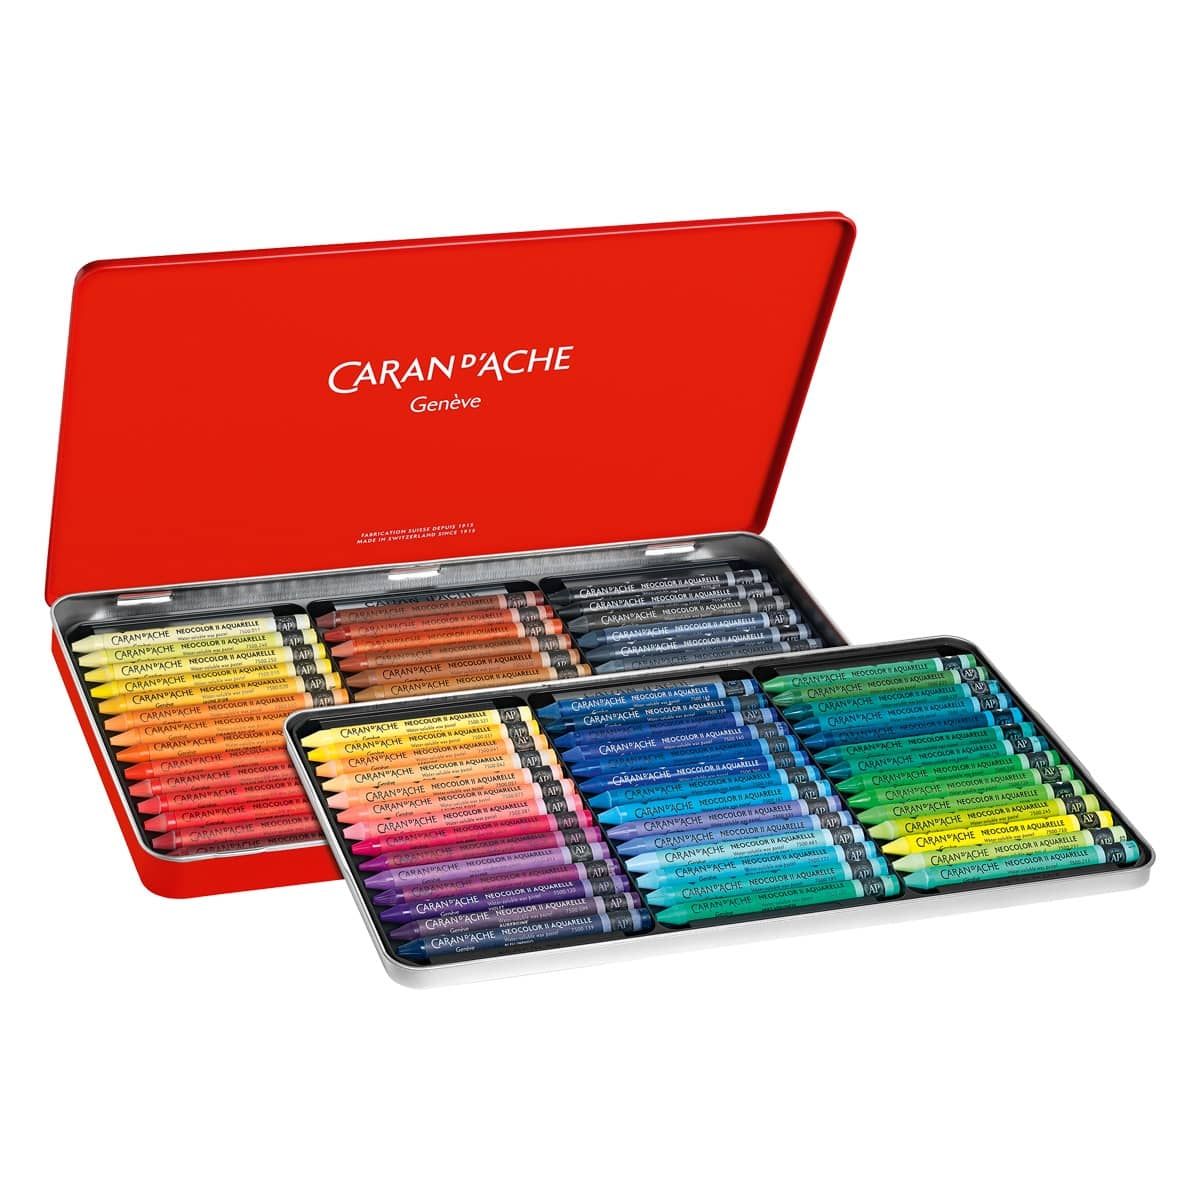 Caran D'Ache Neocolor II Aquarelle Water-Soluble Wax Pastel Tin Set of 84 - Assorted Colors